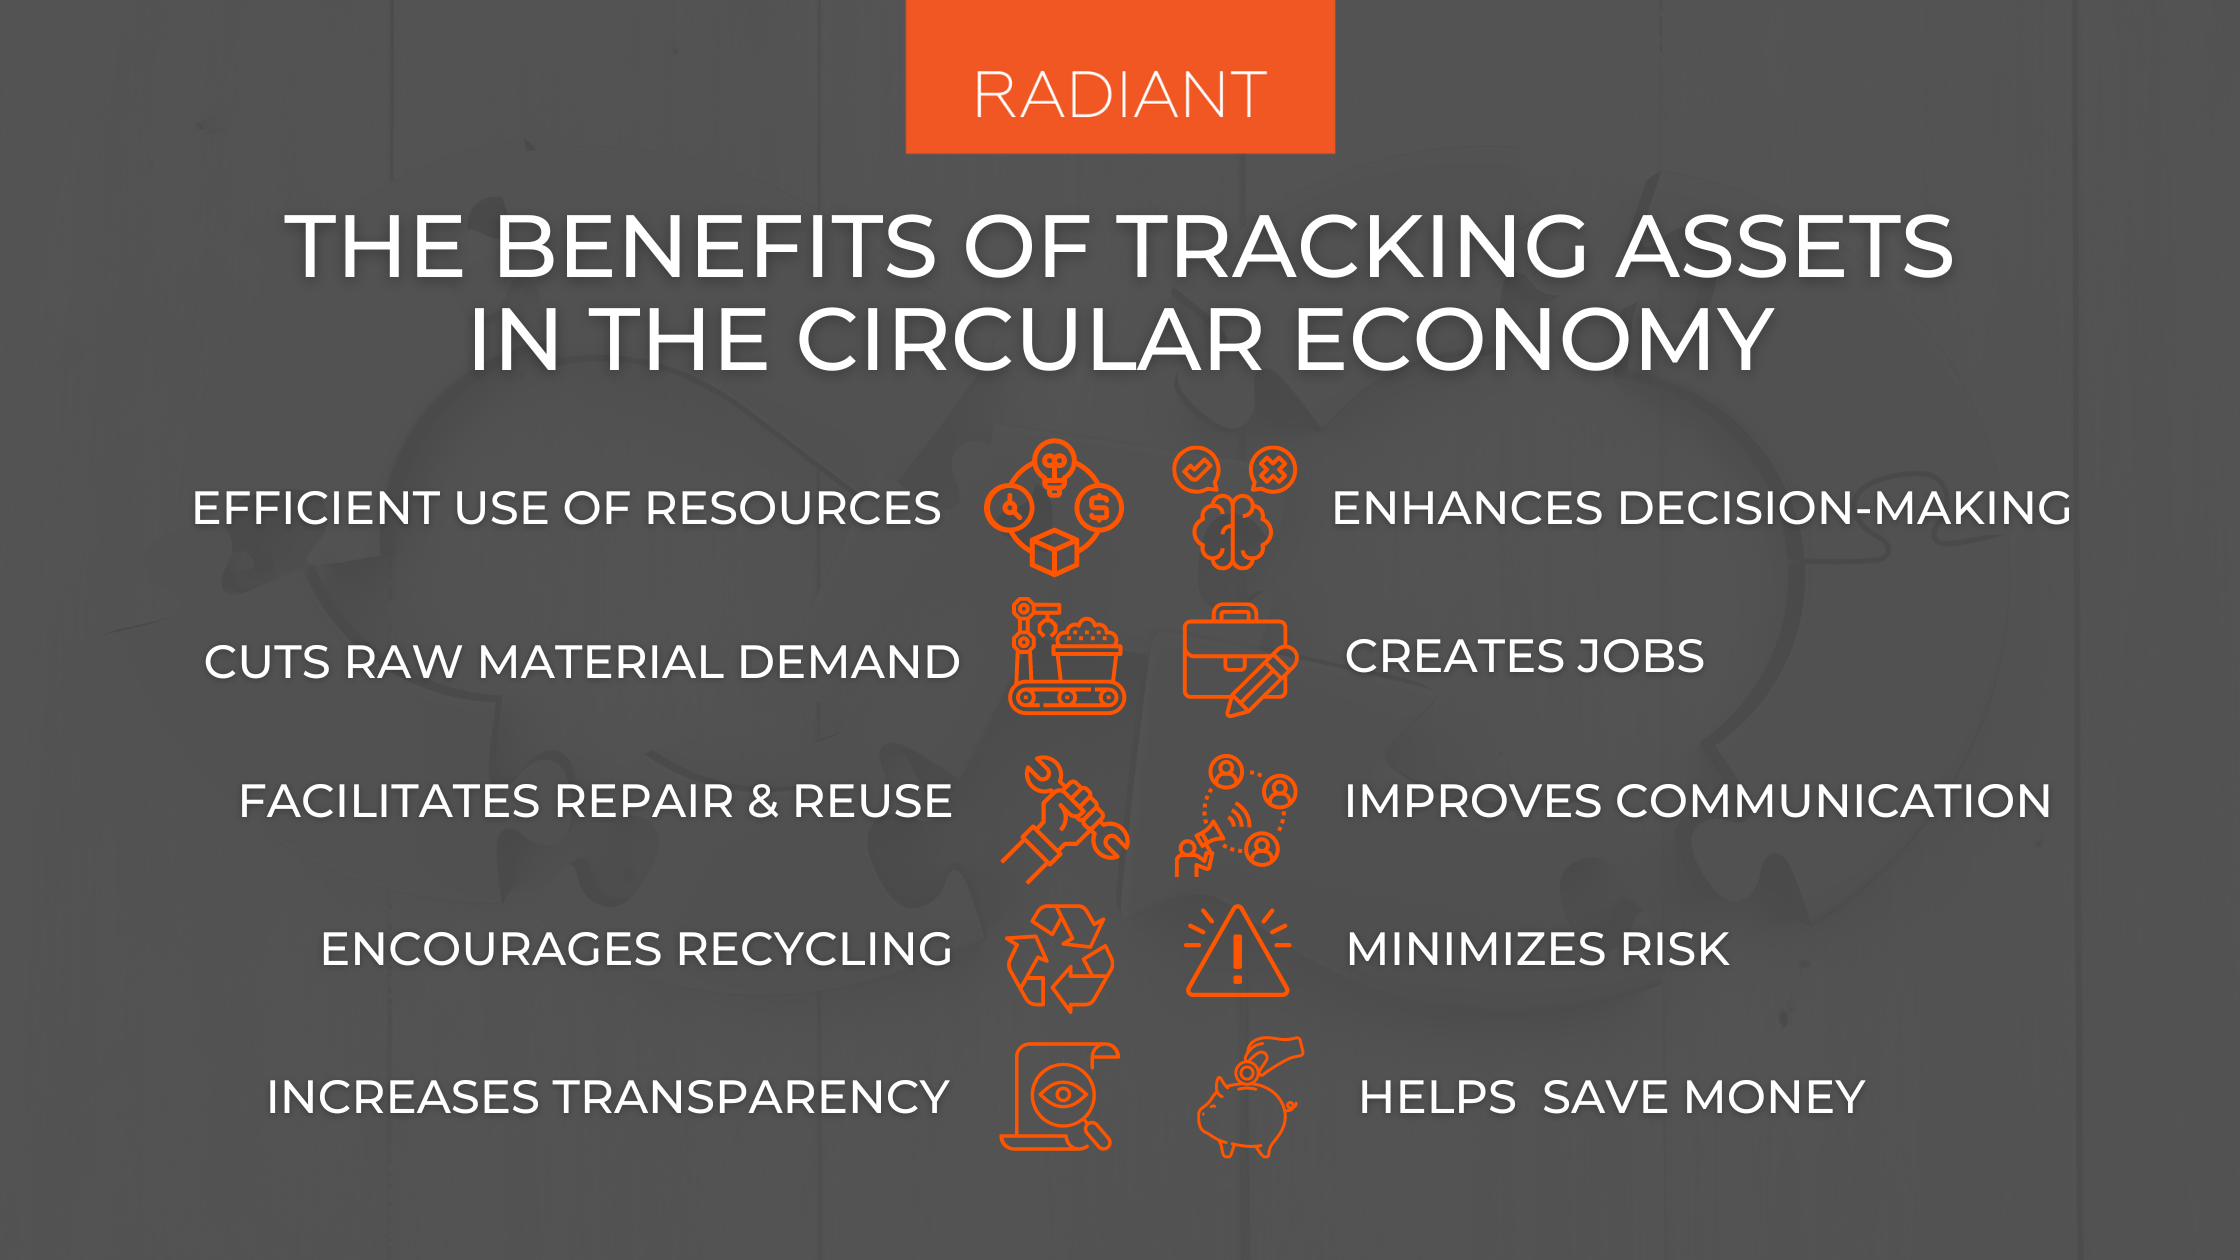 Tracking Assets Enables The Circular Economy - Asset Tracking In The Circular Economy - Circular Economy - The Circular Economy - Tracking Assets - Asset Management In The Circular Economy - Asset Tracking In A Circular Economy - Tracking Assets In A Circular Economy - Asset Tracking System - Circular Economy ESG - Circular Solutions - What is the Circular Economy